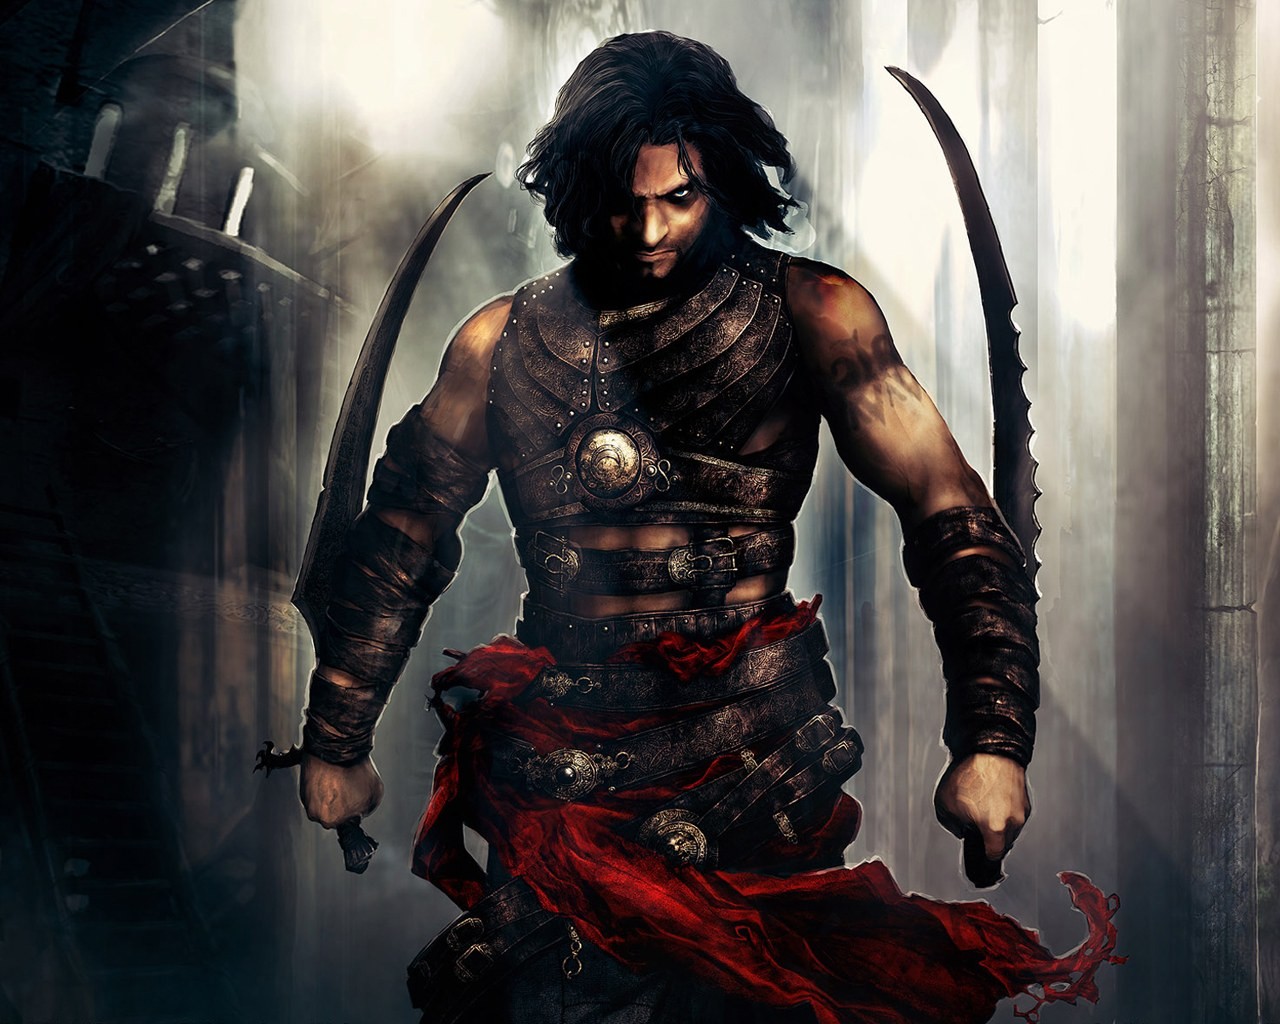 Prince of Persia full range of wallpapers #15 - 1280x1024